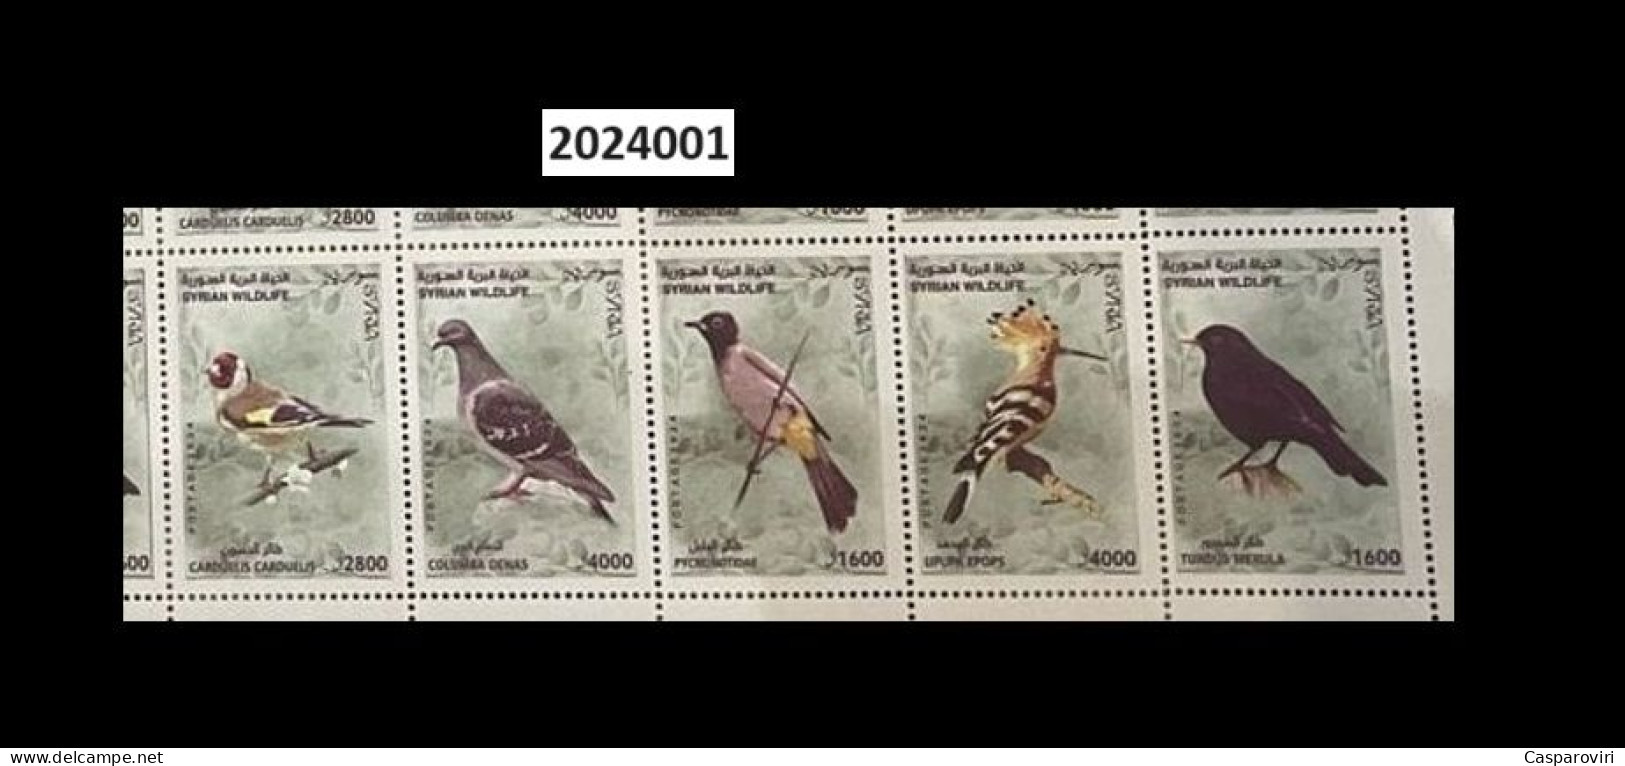 2024401; Syria; 2024; Strip Of 5 Stamps On Envelope; Syrian Wildlife; Syrian Birds; 5 Different Stamps; Canceled - Syrie